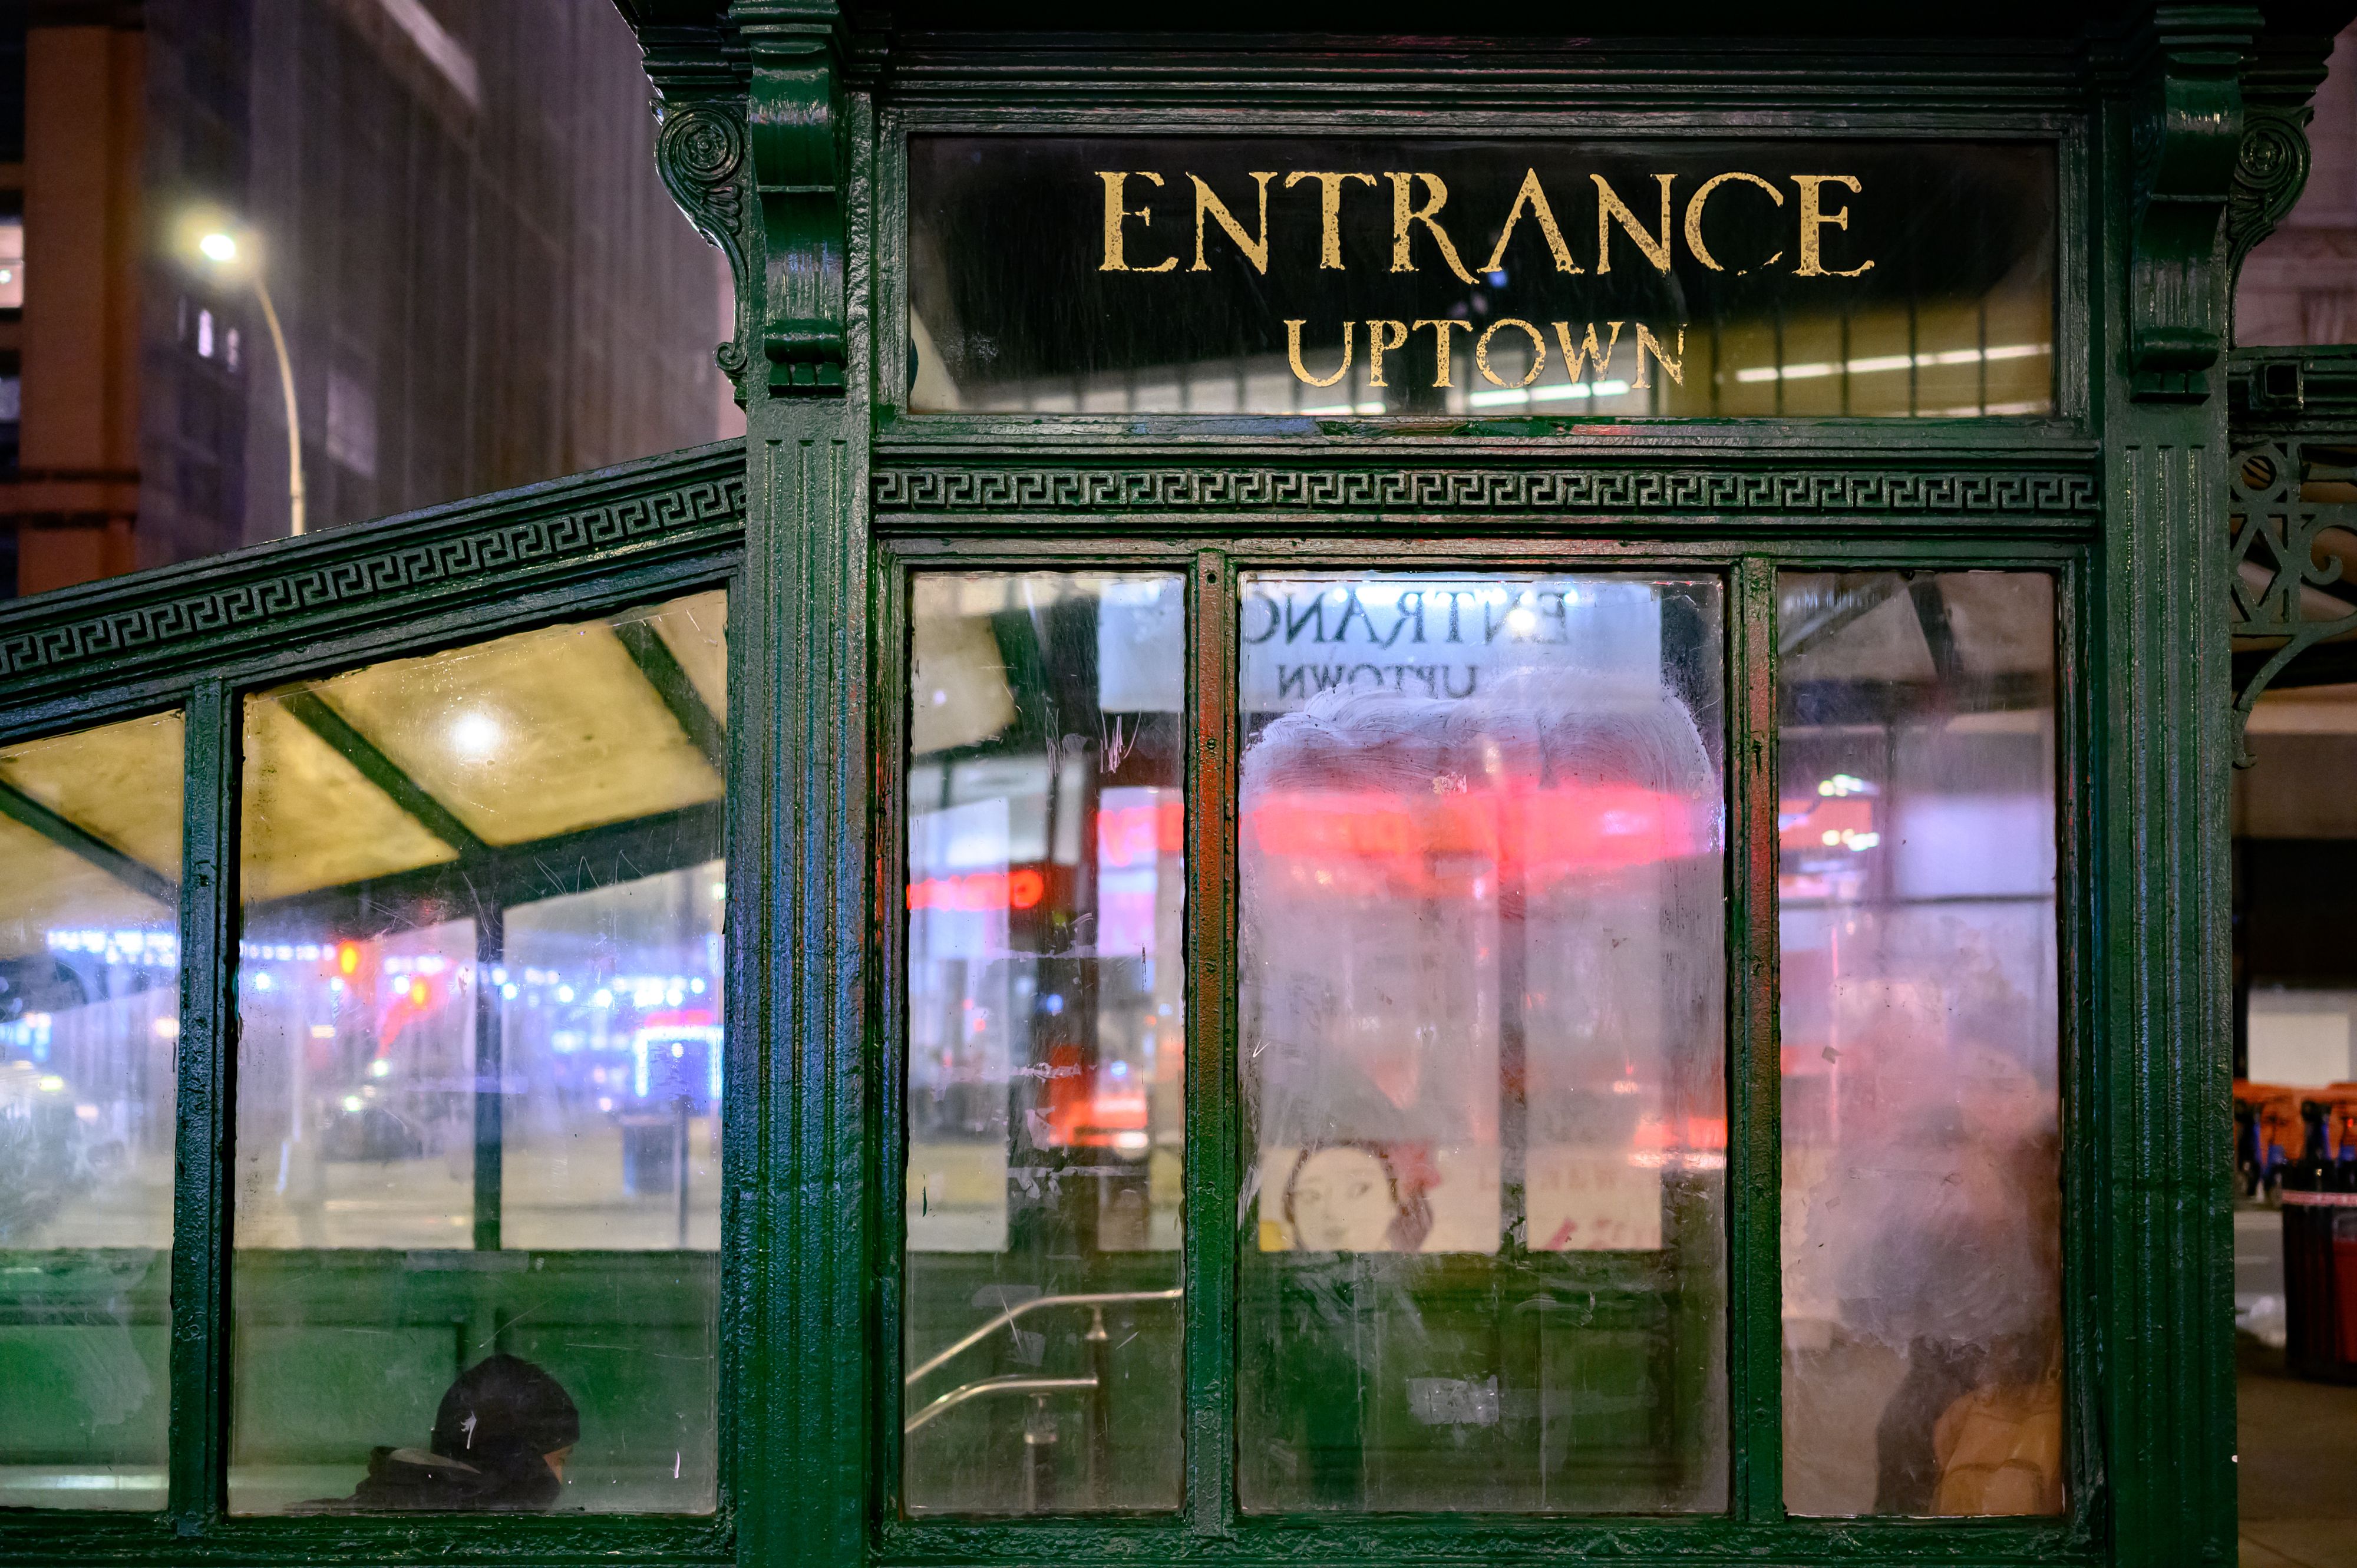 Old uptown entrance to subway in New York City, New York at night